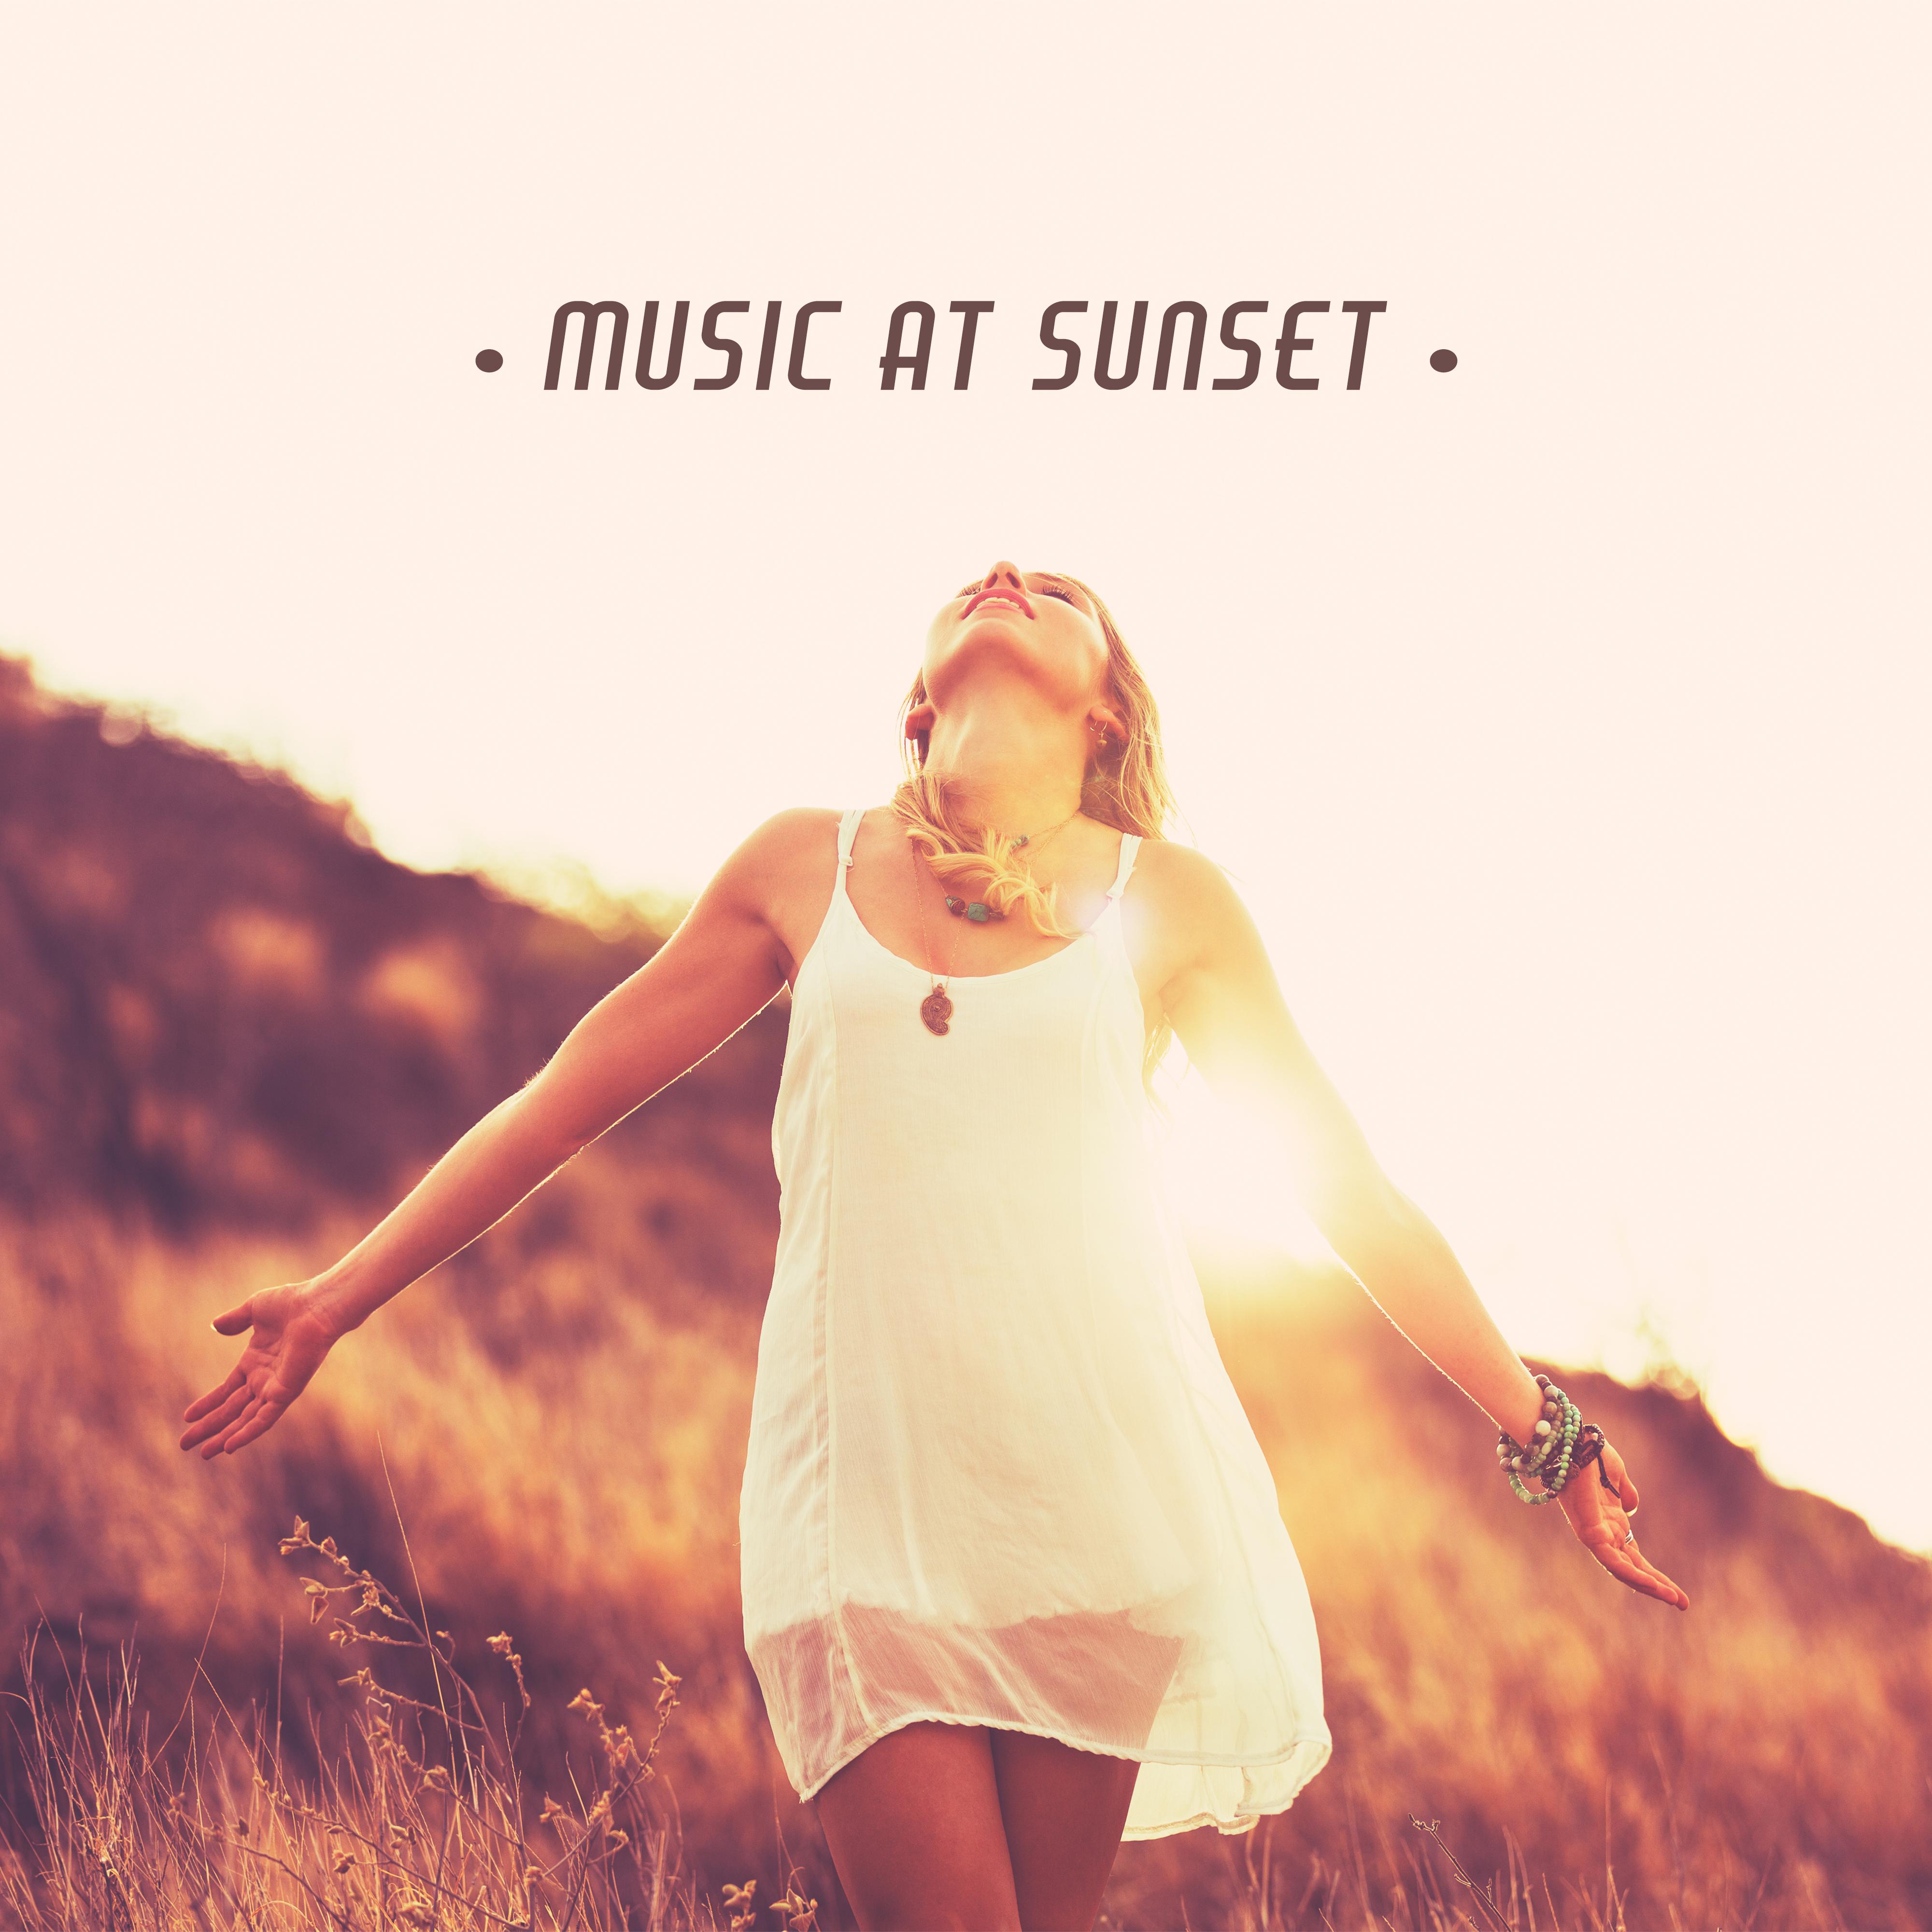 Music at Sunset - Beautiful Chillout Tunes for the Evening, to Listen, Rest and Immerse Yourself in the Wonderful Sounds of Relaxing Chillout